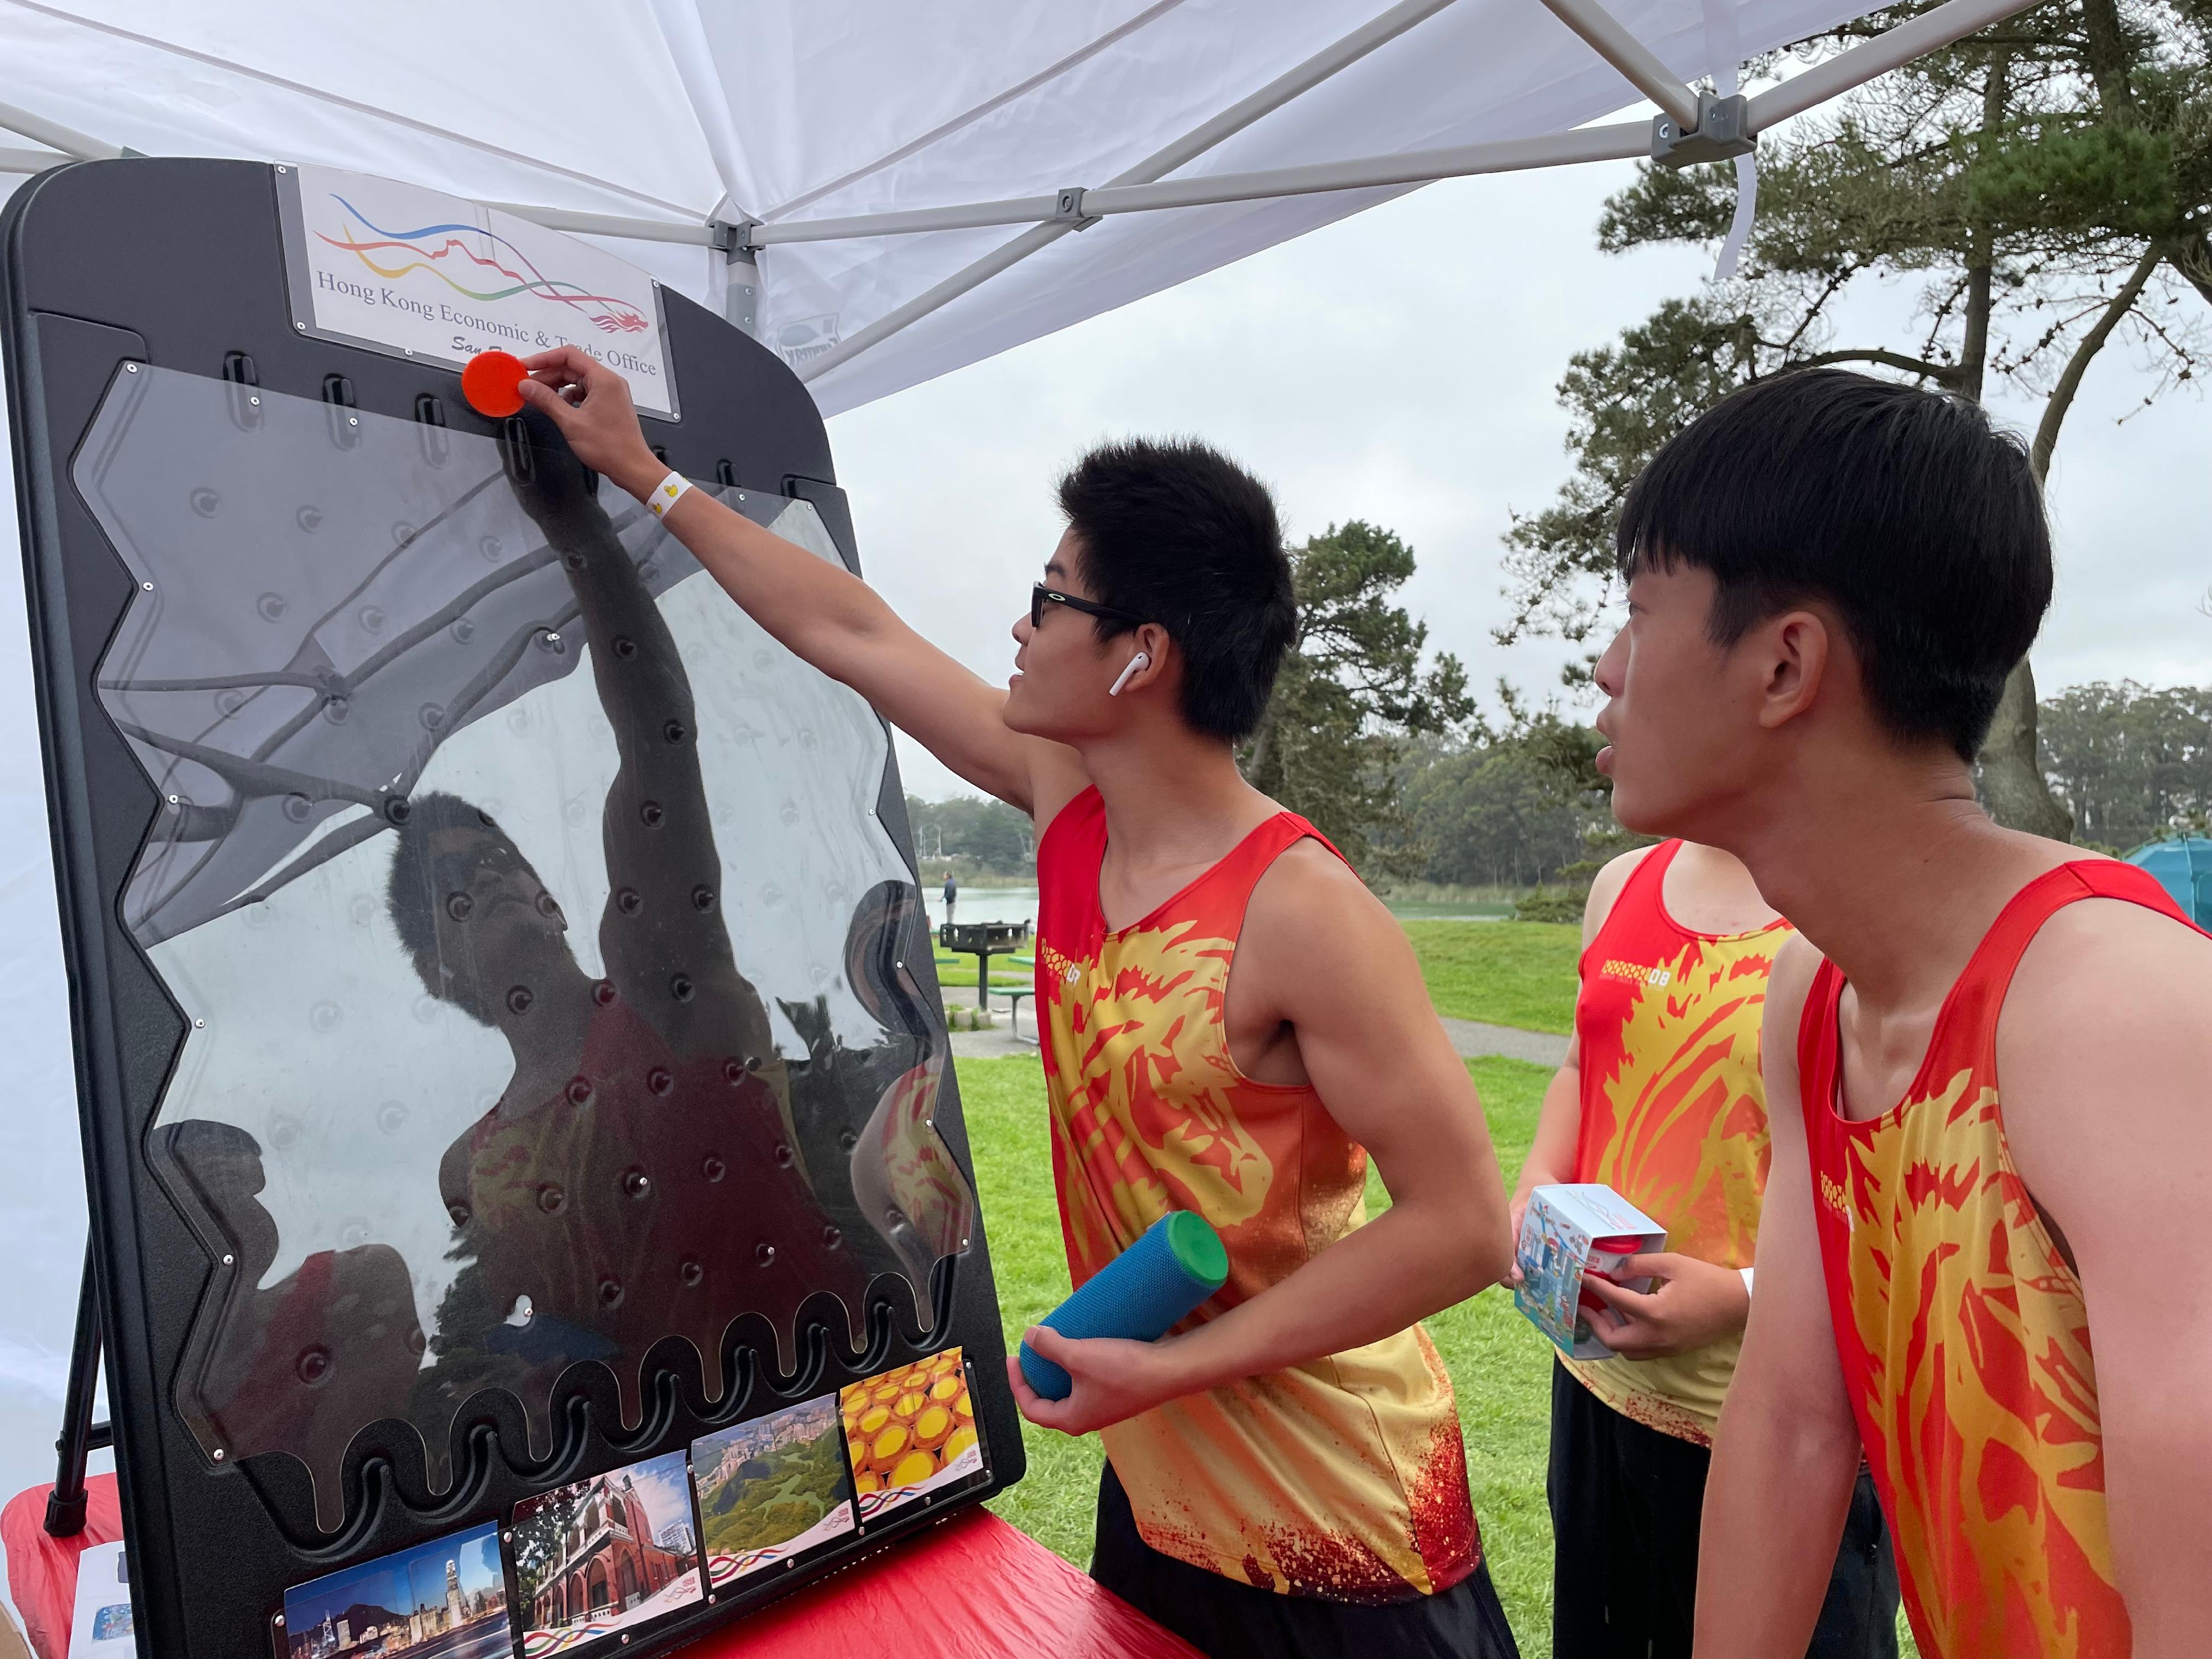 The Hong Kong Economic and Trade Office in San Francisco (HKETO San Francisco) sponsored the 2022 San Francisco Dragon Boat Championships held on September 24 and 25 (San Francisco time) at Lake Merced in San Francisco to celebrate the 25th anniversary of the establishment of the Hong Kong Special Administrative Region. HKETO San Francisco set up a booth to share the latest information about Hong Kong to paddlers and race spectators.